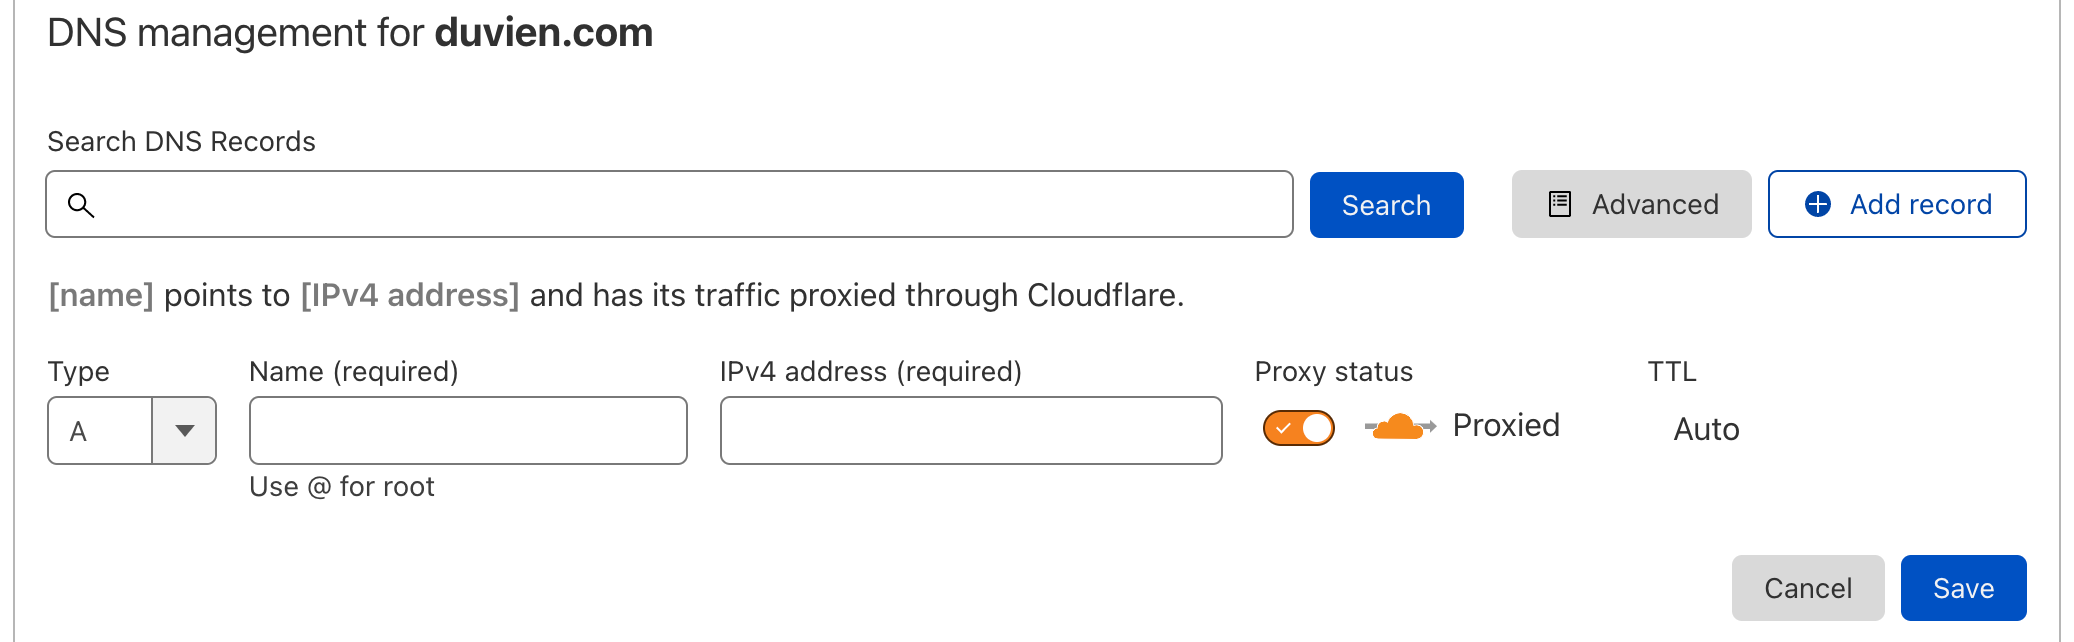 cloudflare DNS